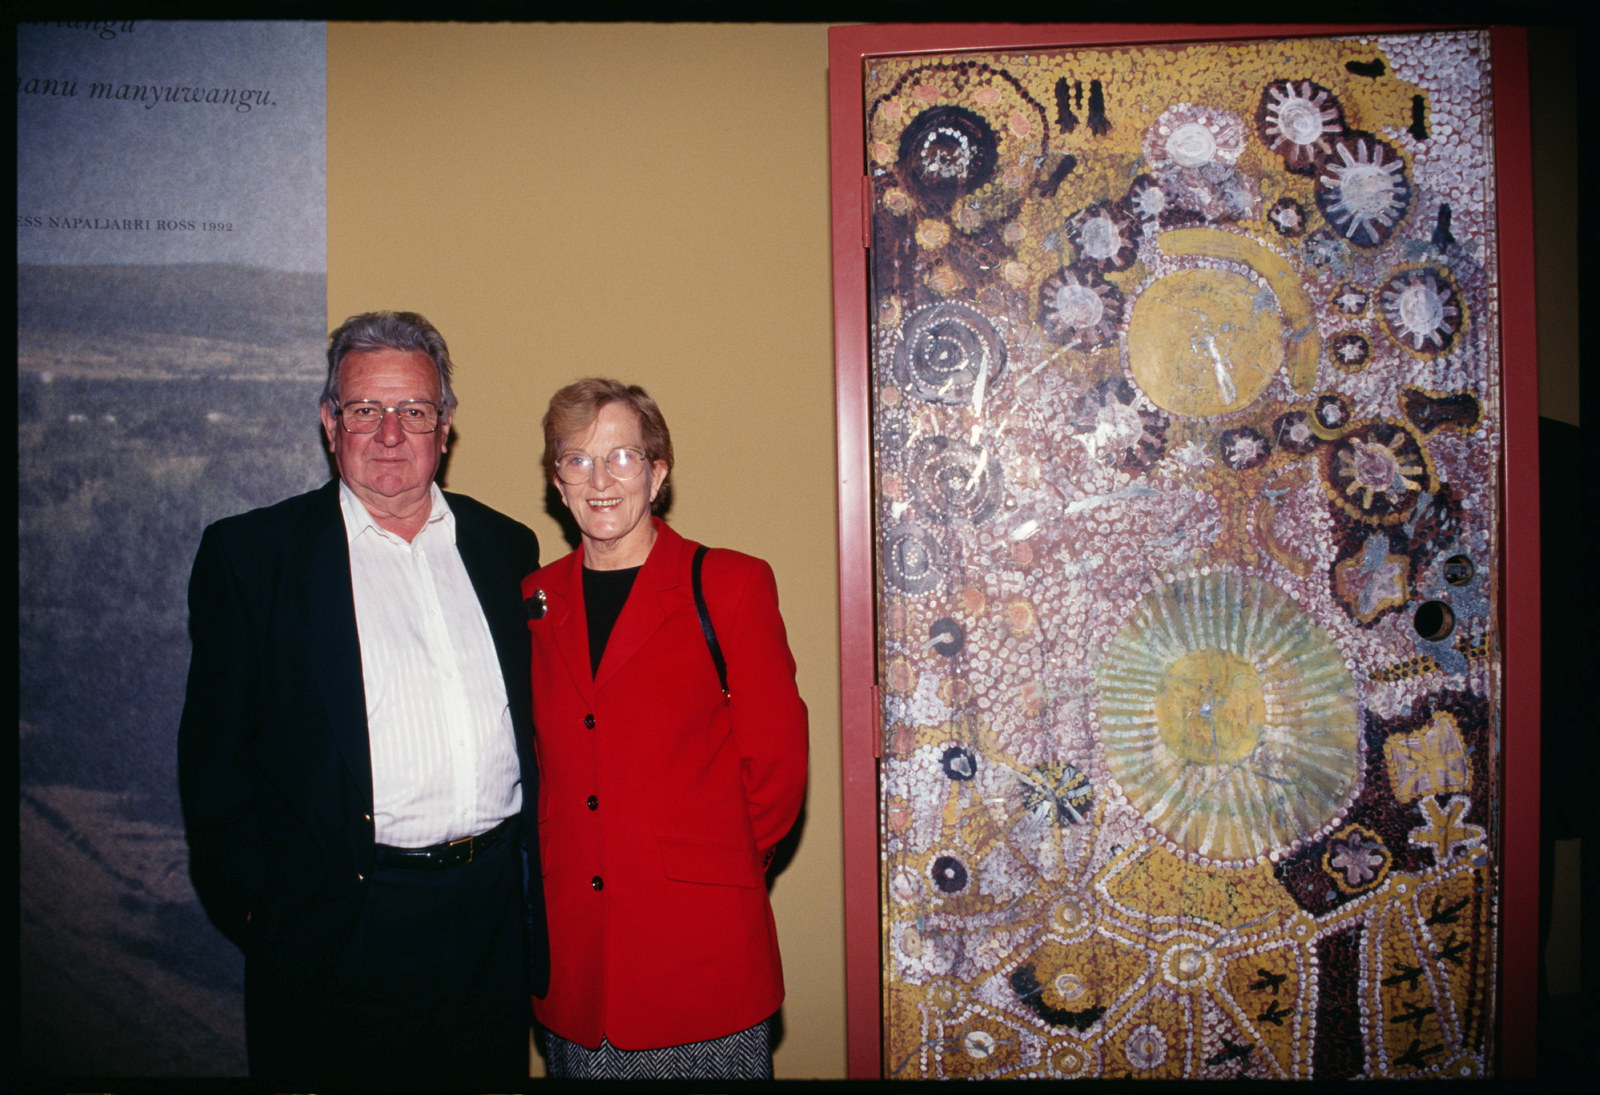 Man in black jacket and woman in red top in front of artwork.